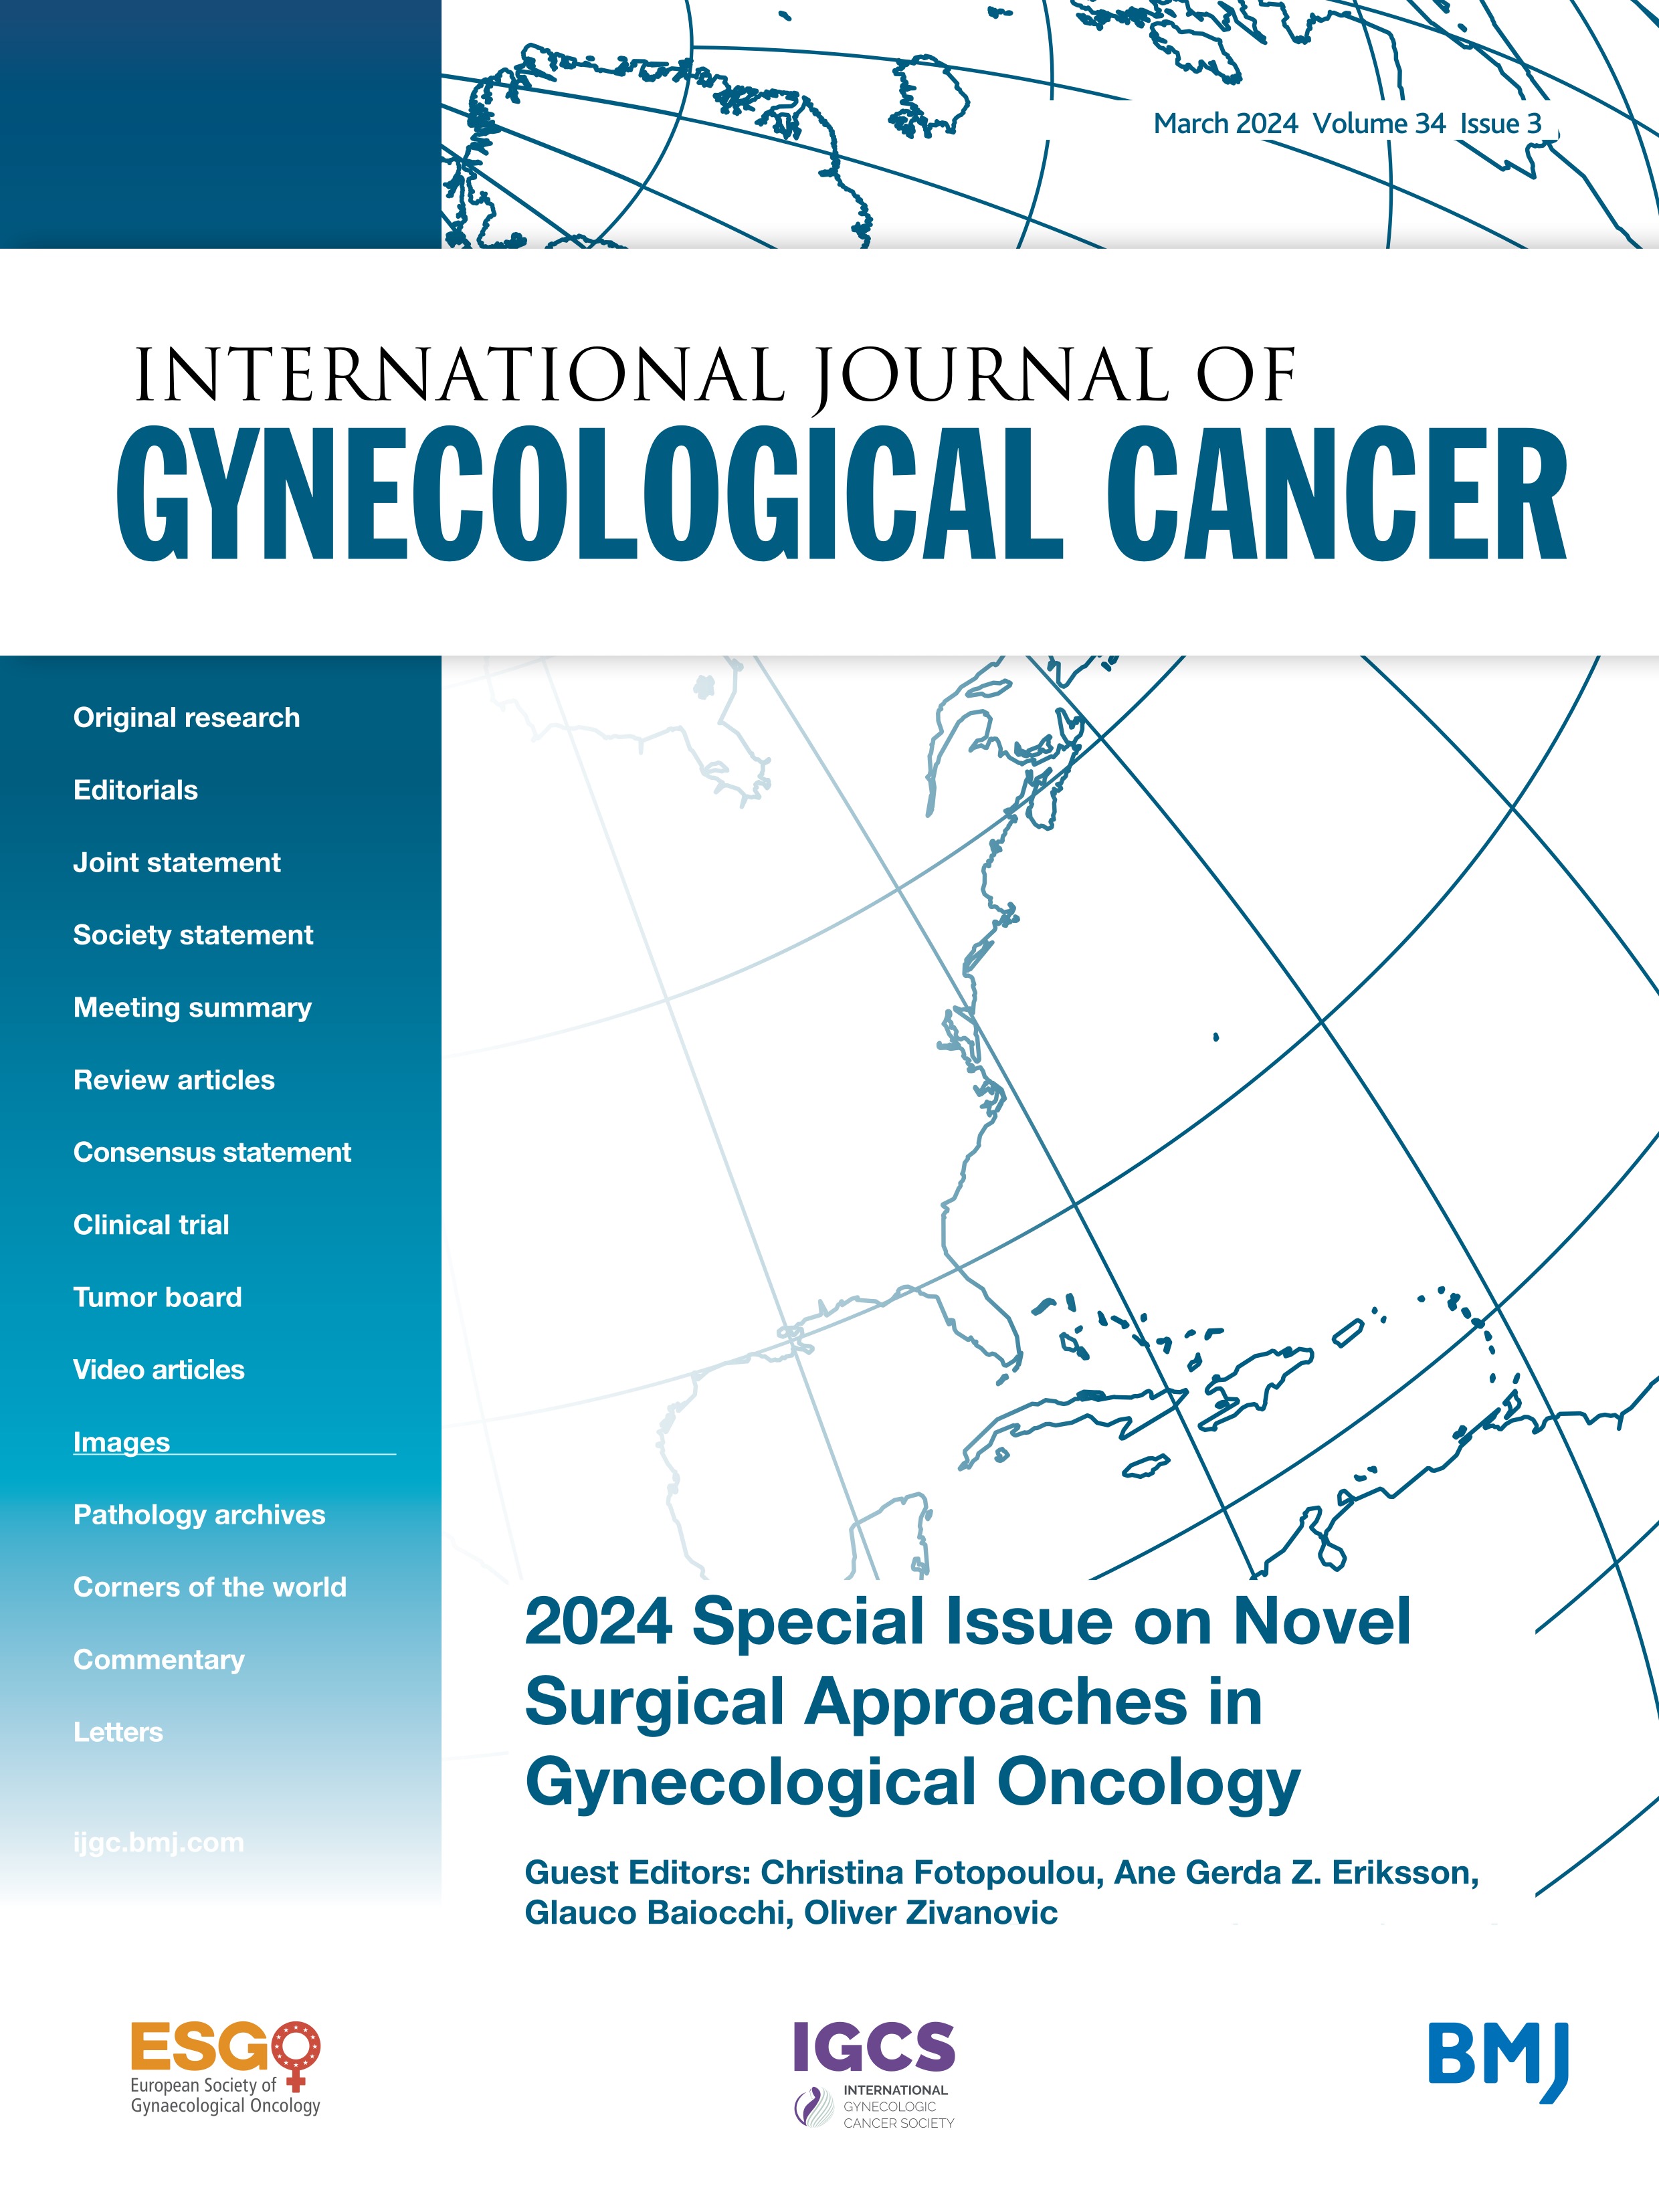 Extra-abdominal cytoreductive techniques in ovarian cancer: how far can (should) we go?